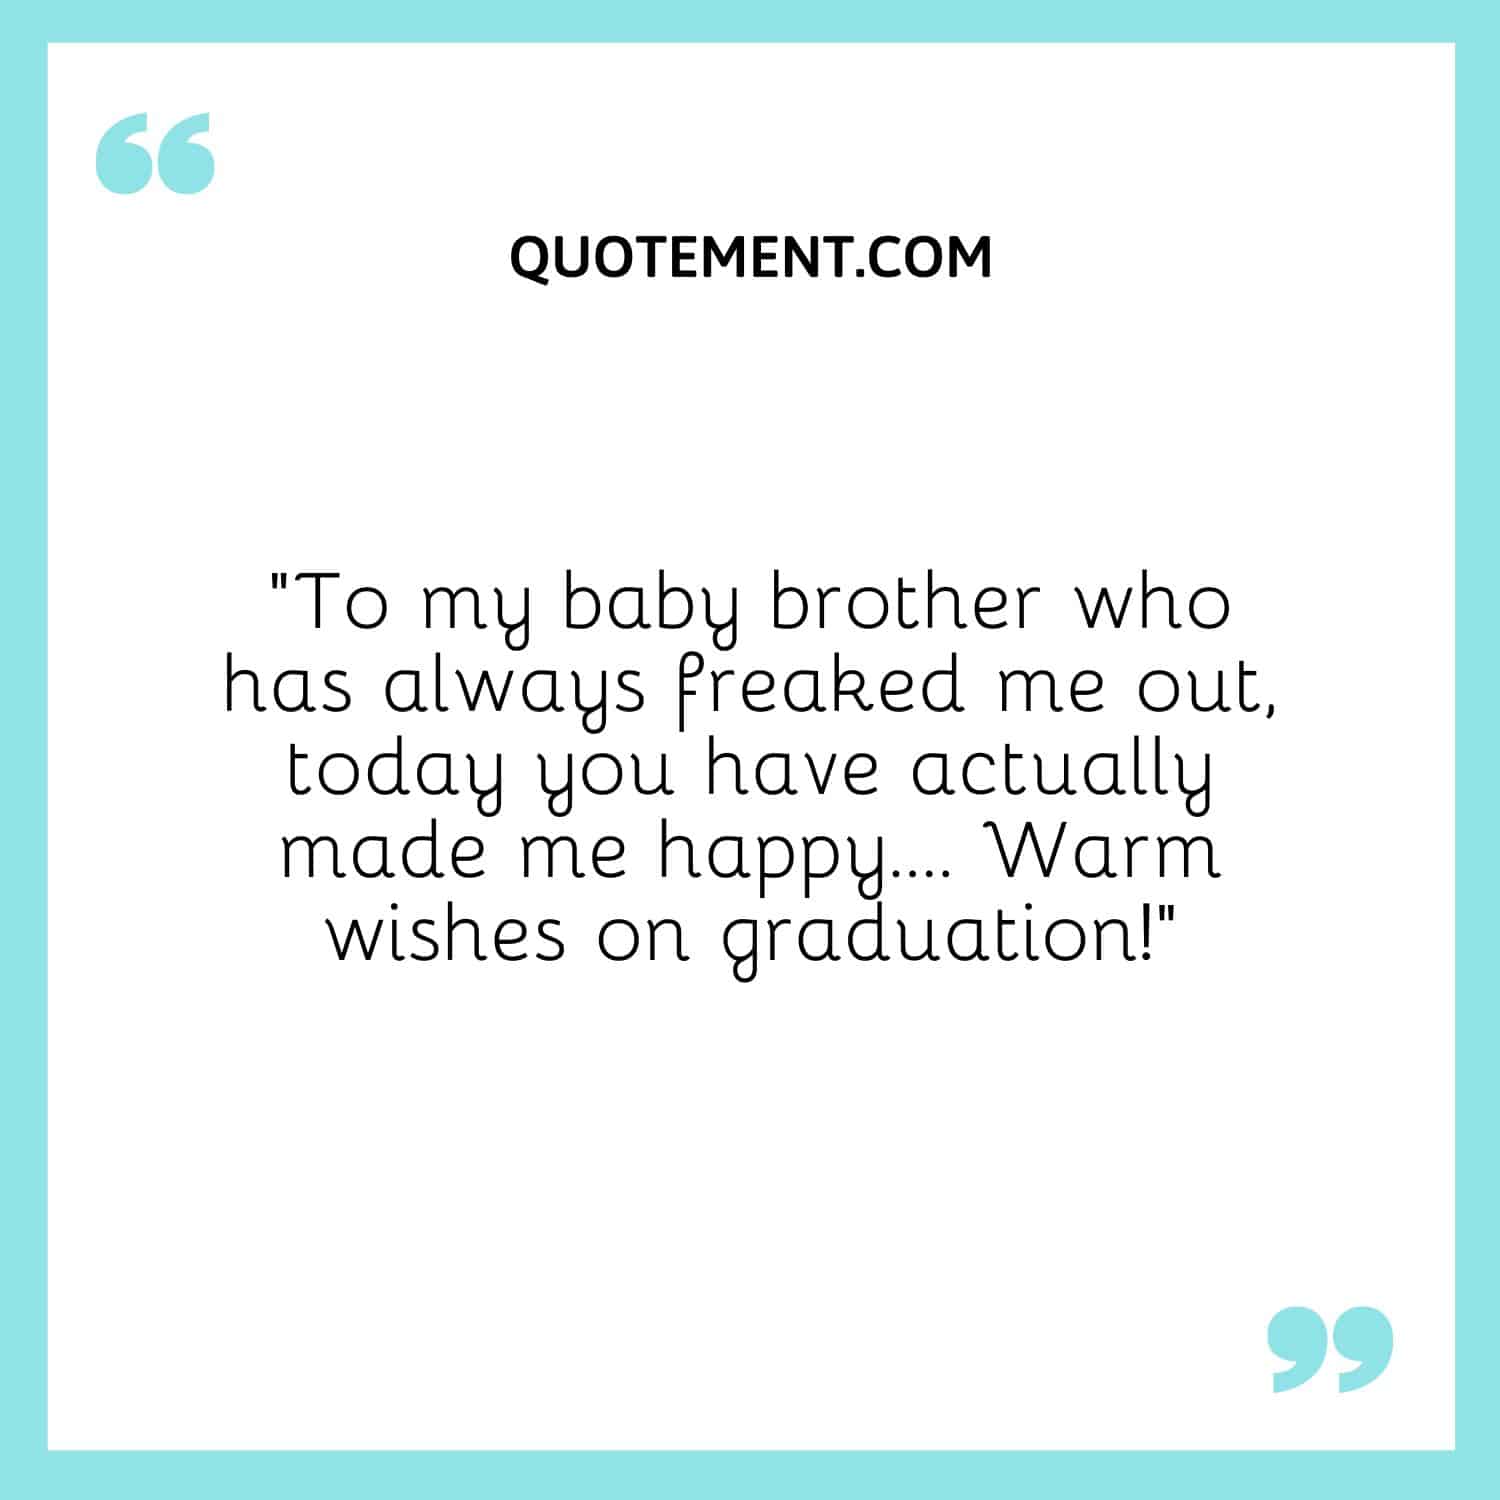 “To my baby brother who has always freaked me out, today you have actually made me happy…. Warm wishes on graduation!”